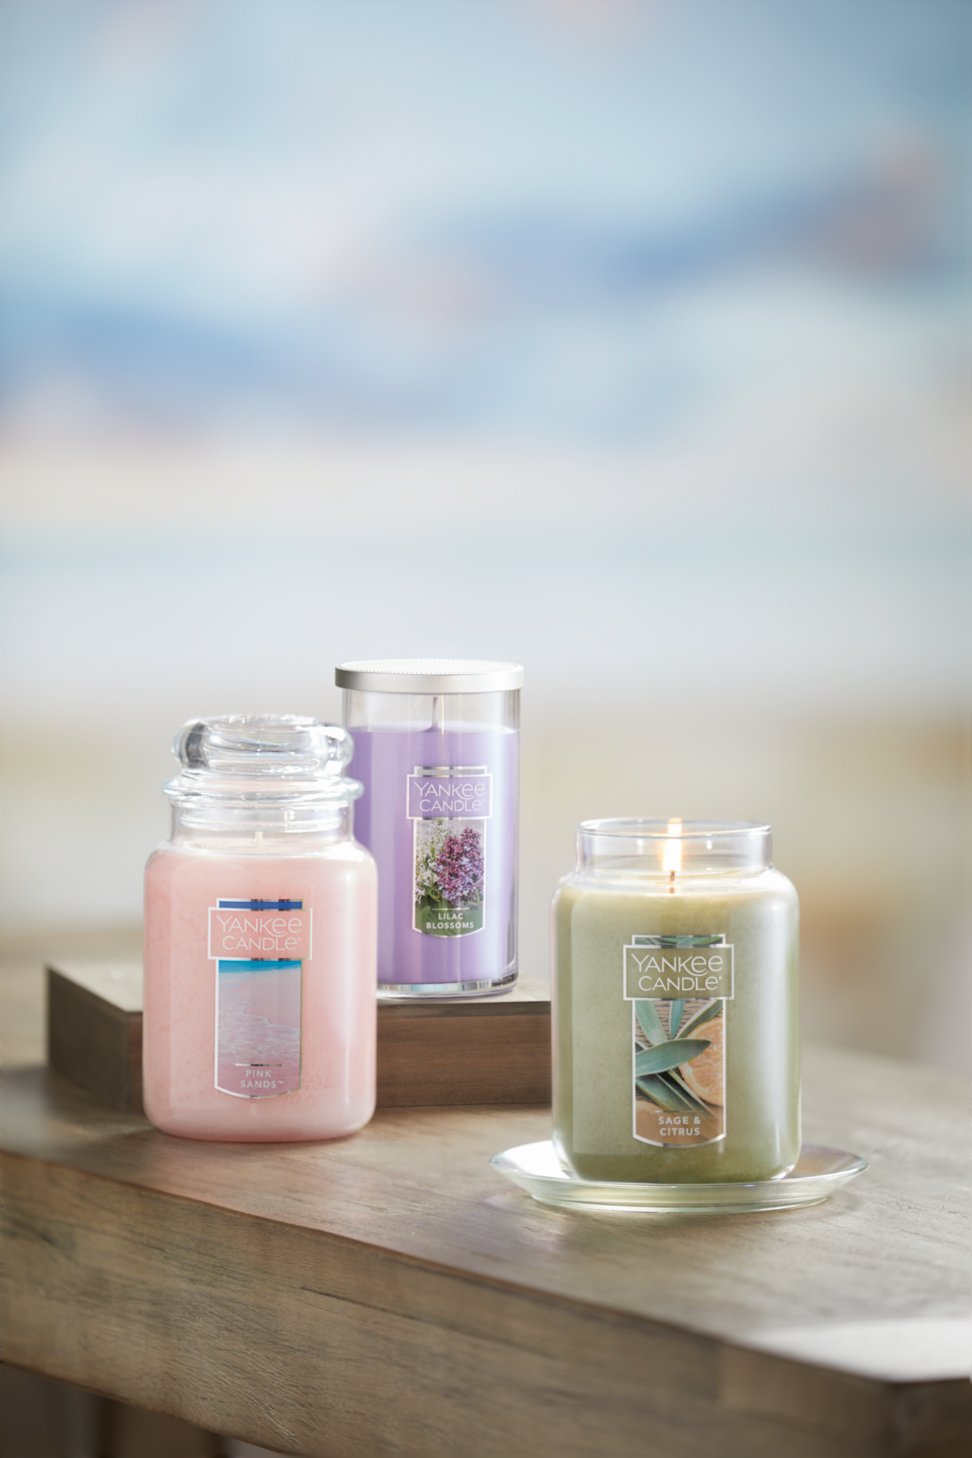 sage and citrus pink sands large jar candles and medium perfect pillar candle on table